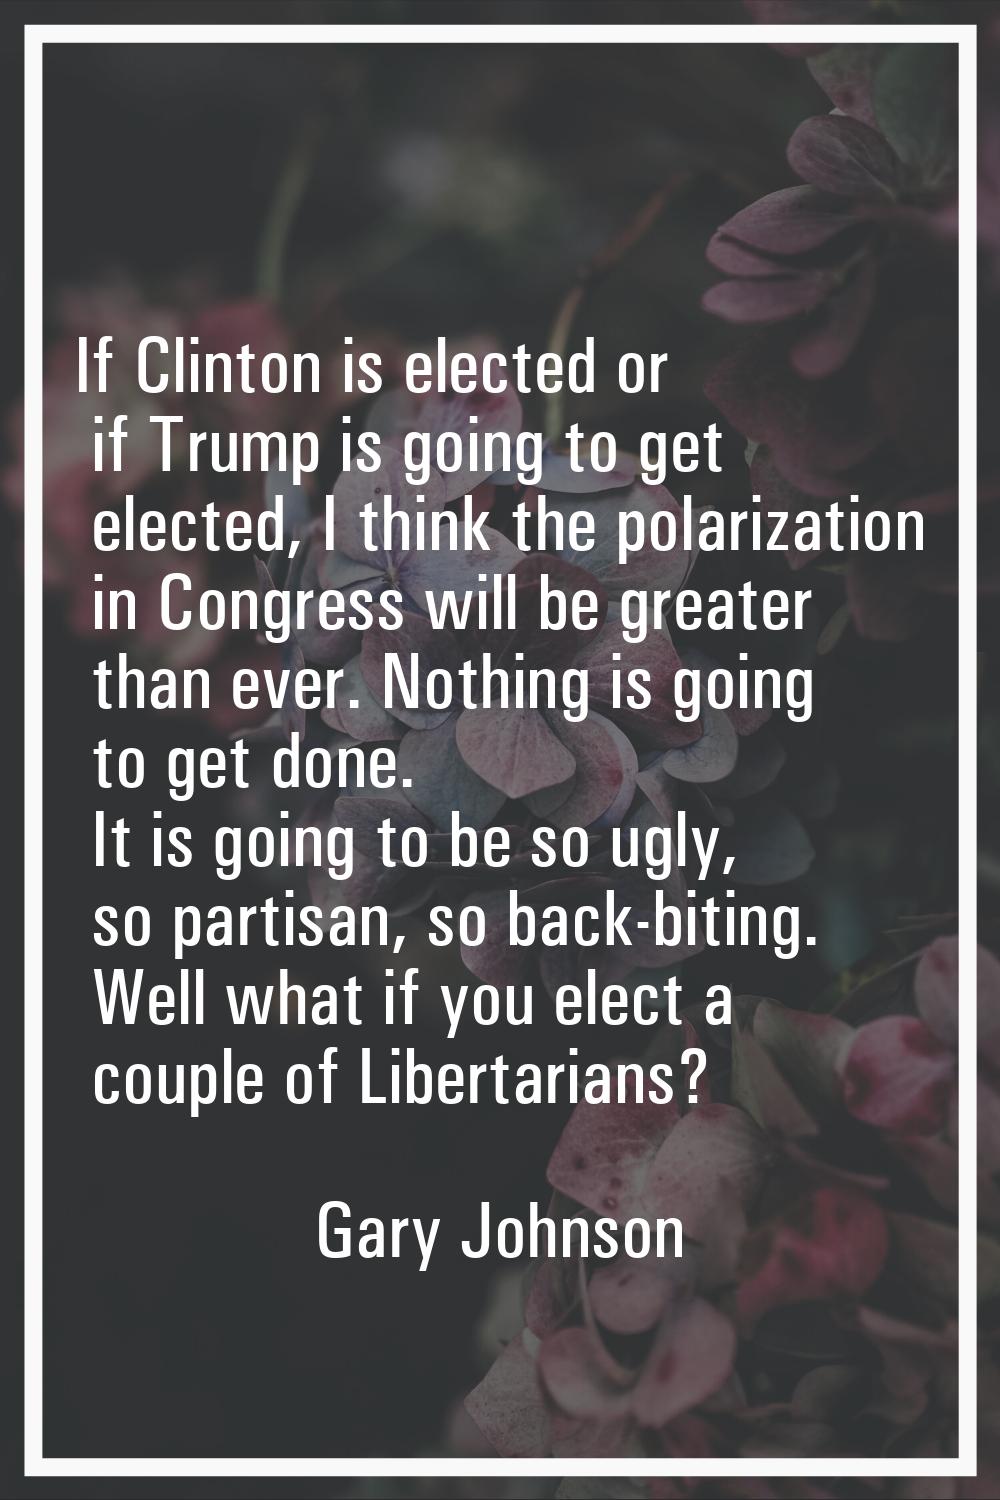 If Clinton is elected or if Trump is going to get elected, I think the polarization in Congress wil